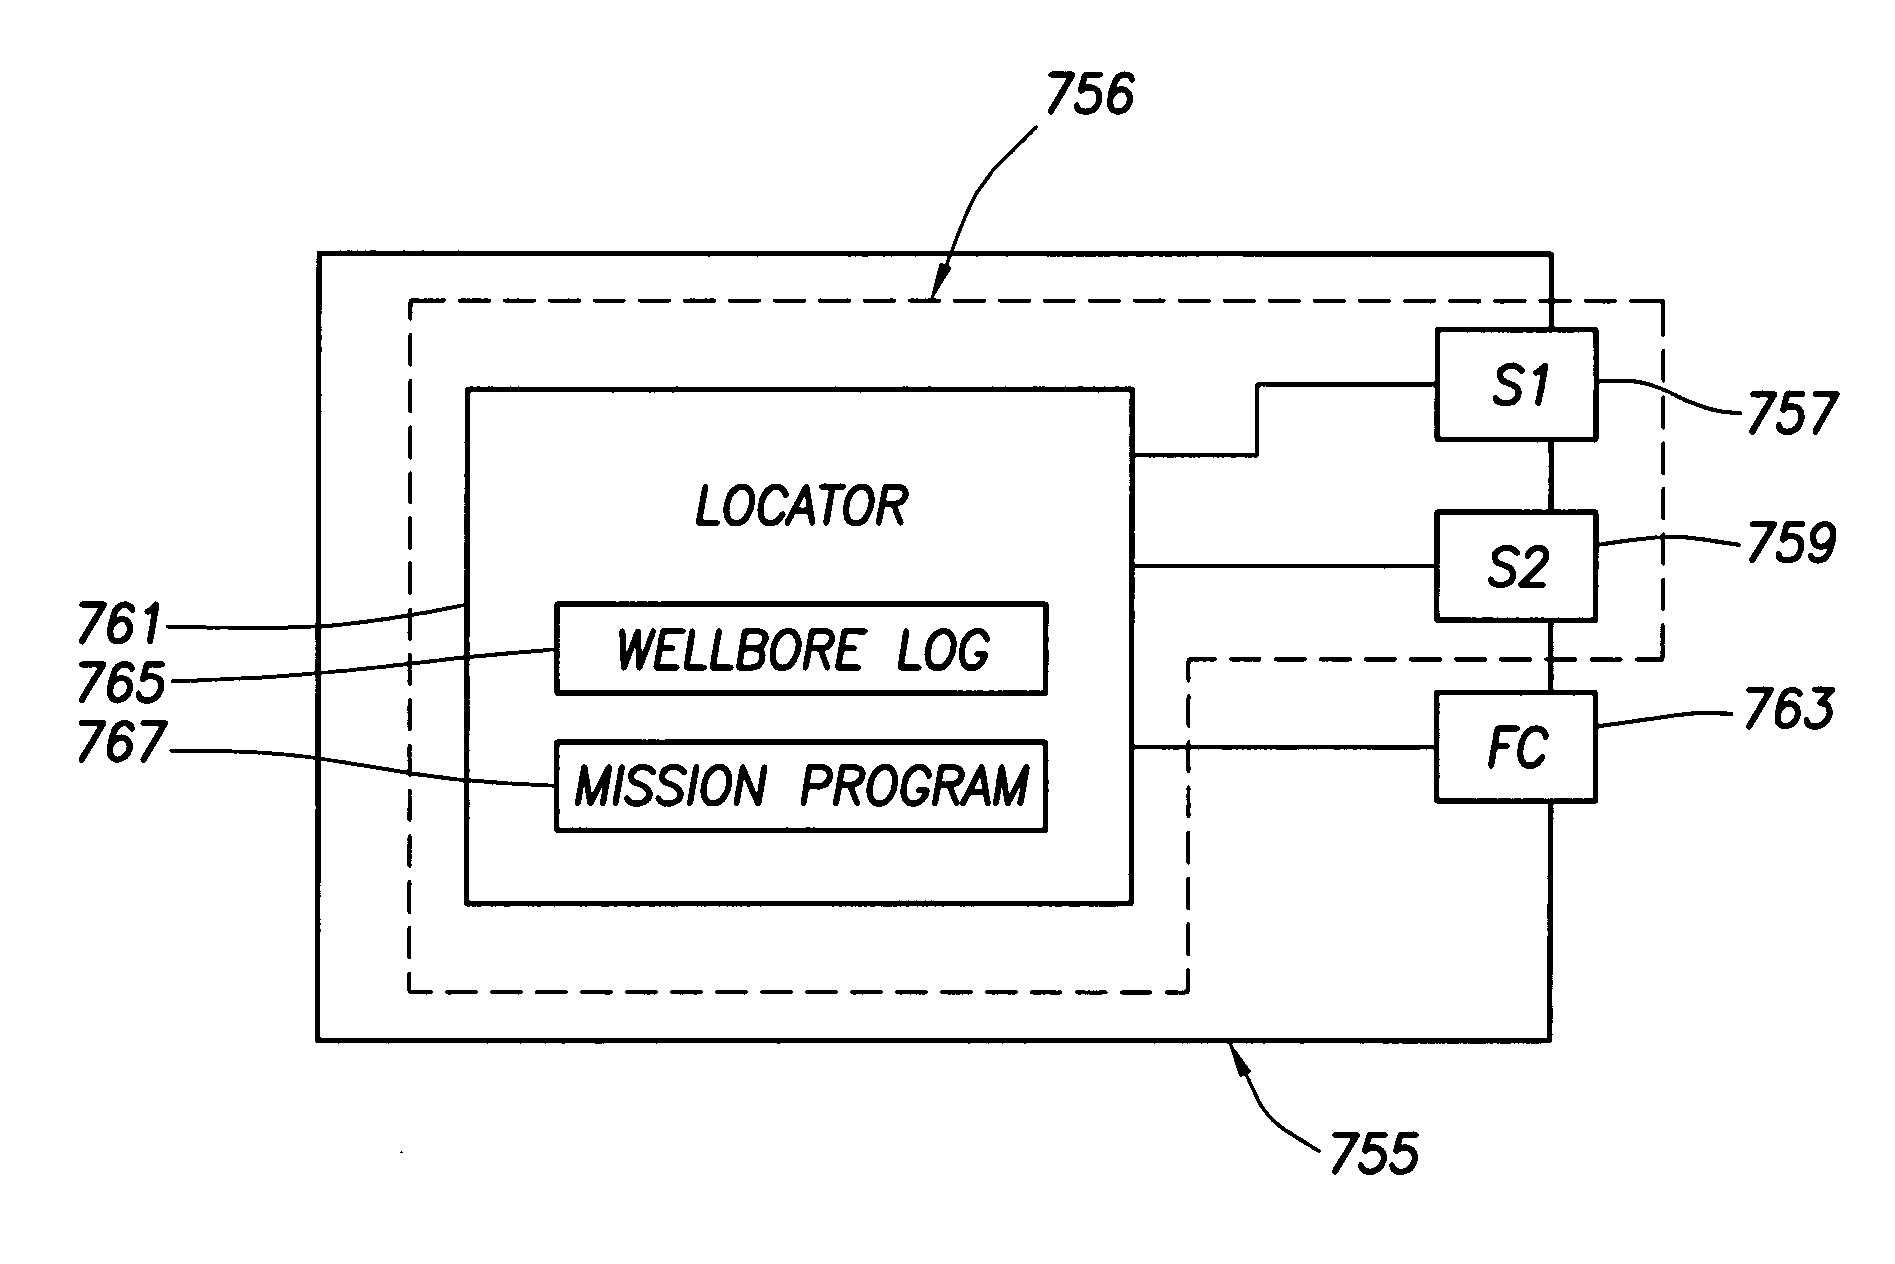 Self-activating downhole tool